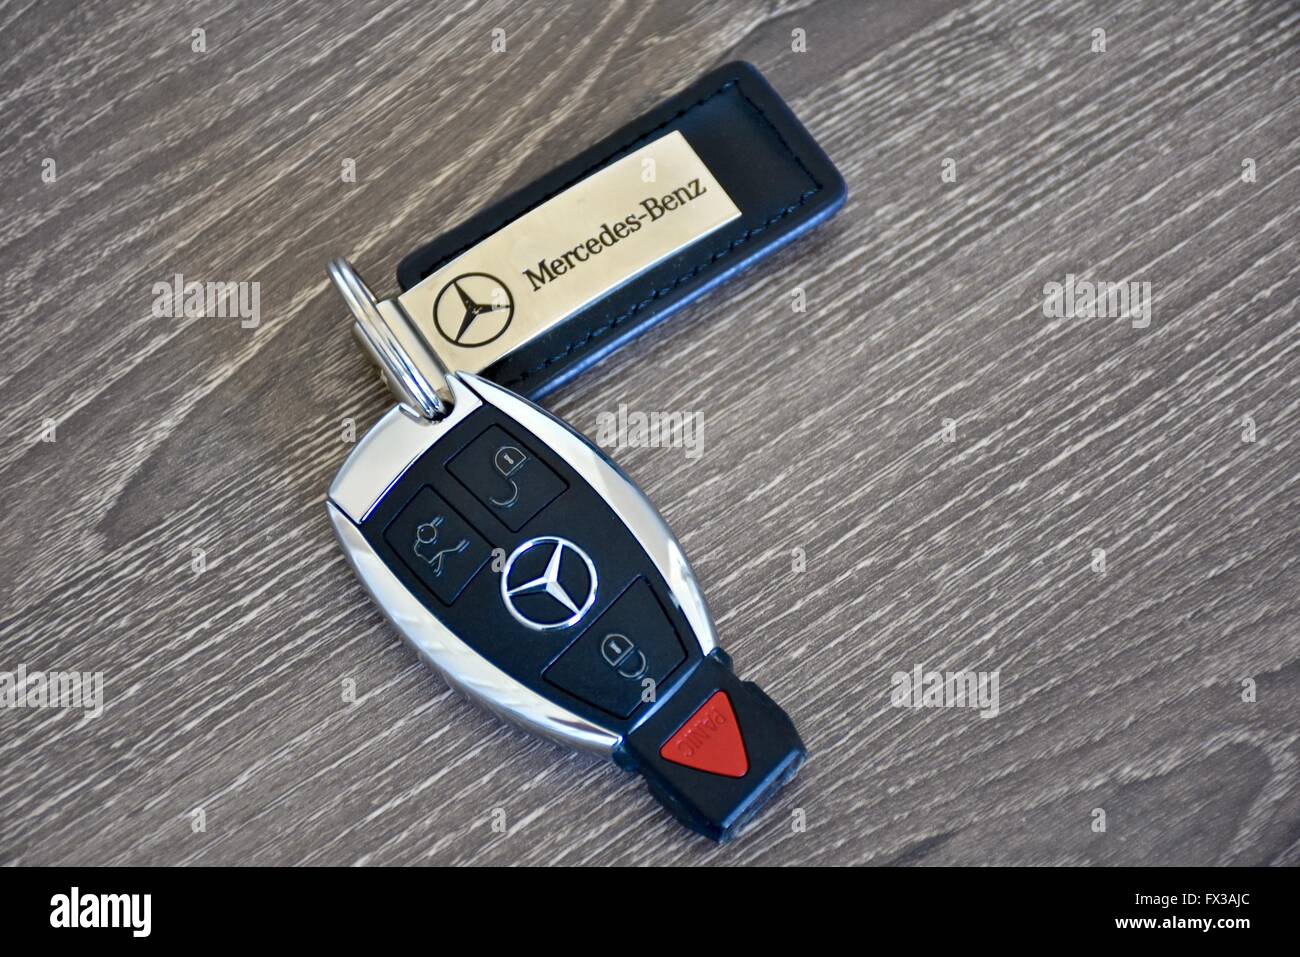 Mercedes Car Remote Access Key Fob Editorial Stock Image - Image of engine,  mercedes: 240734769